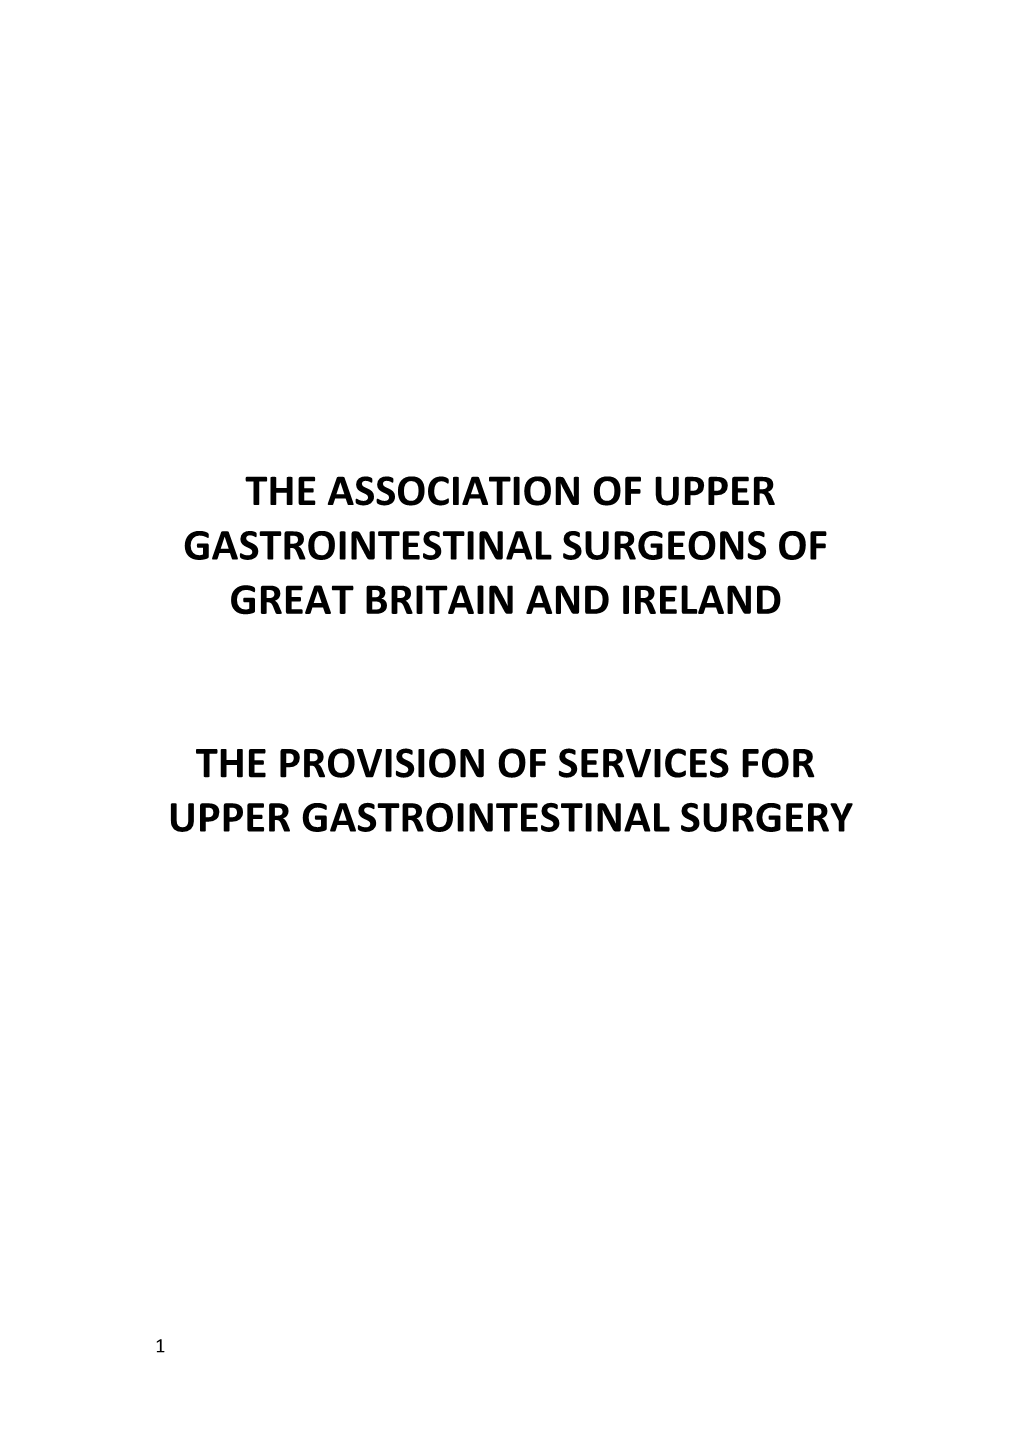 The Association of Upper Gastrointestinal Surgeons Of